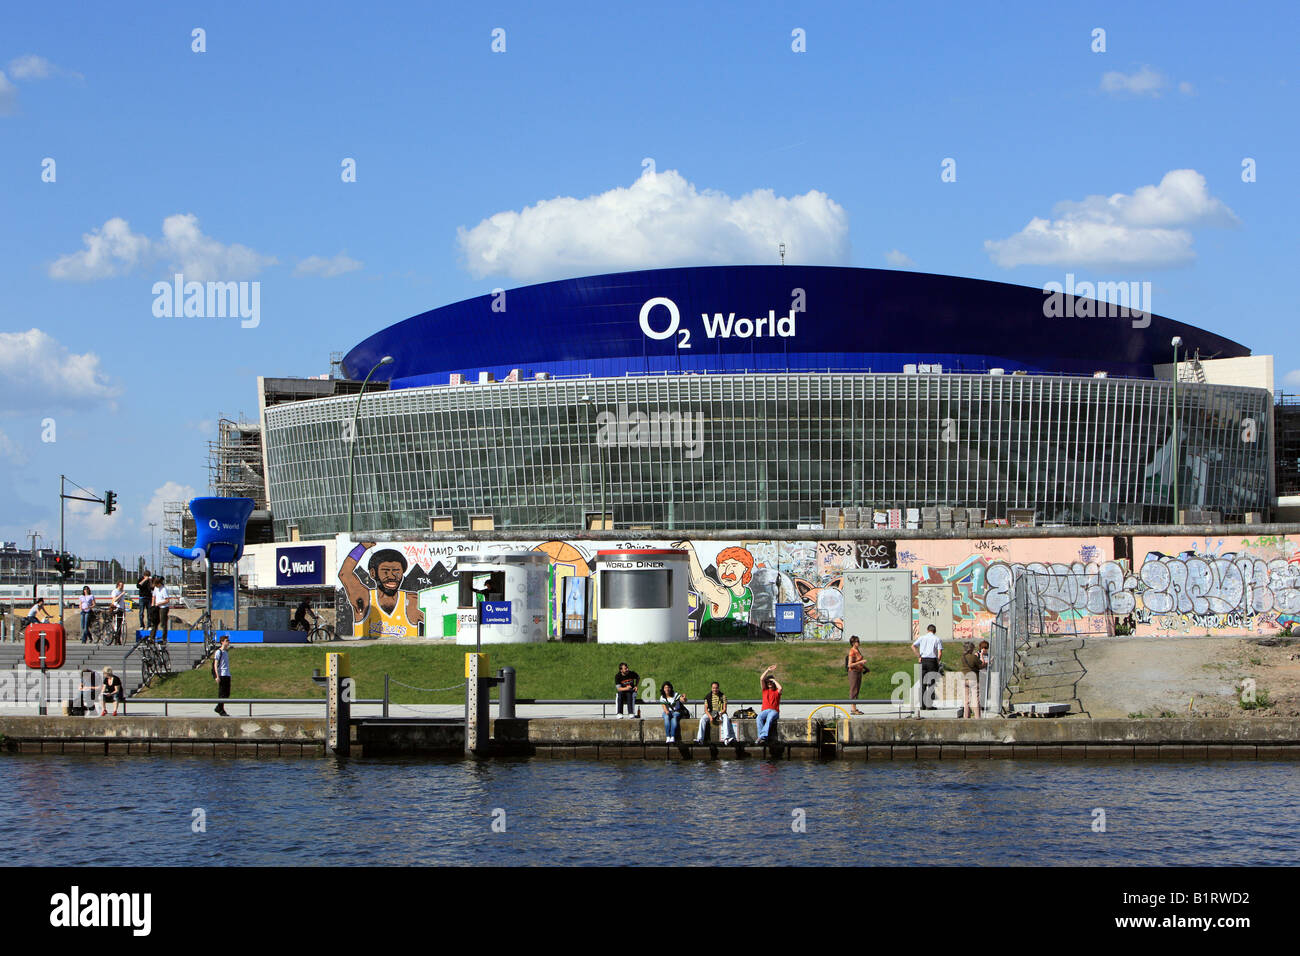 O2 World, Berlin, Germany, Europe Banque D'Images